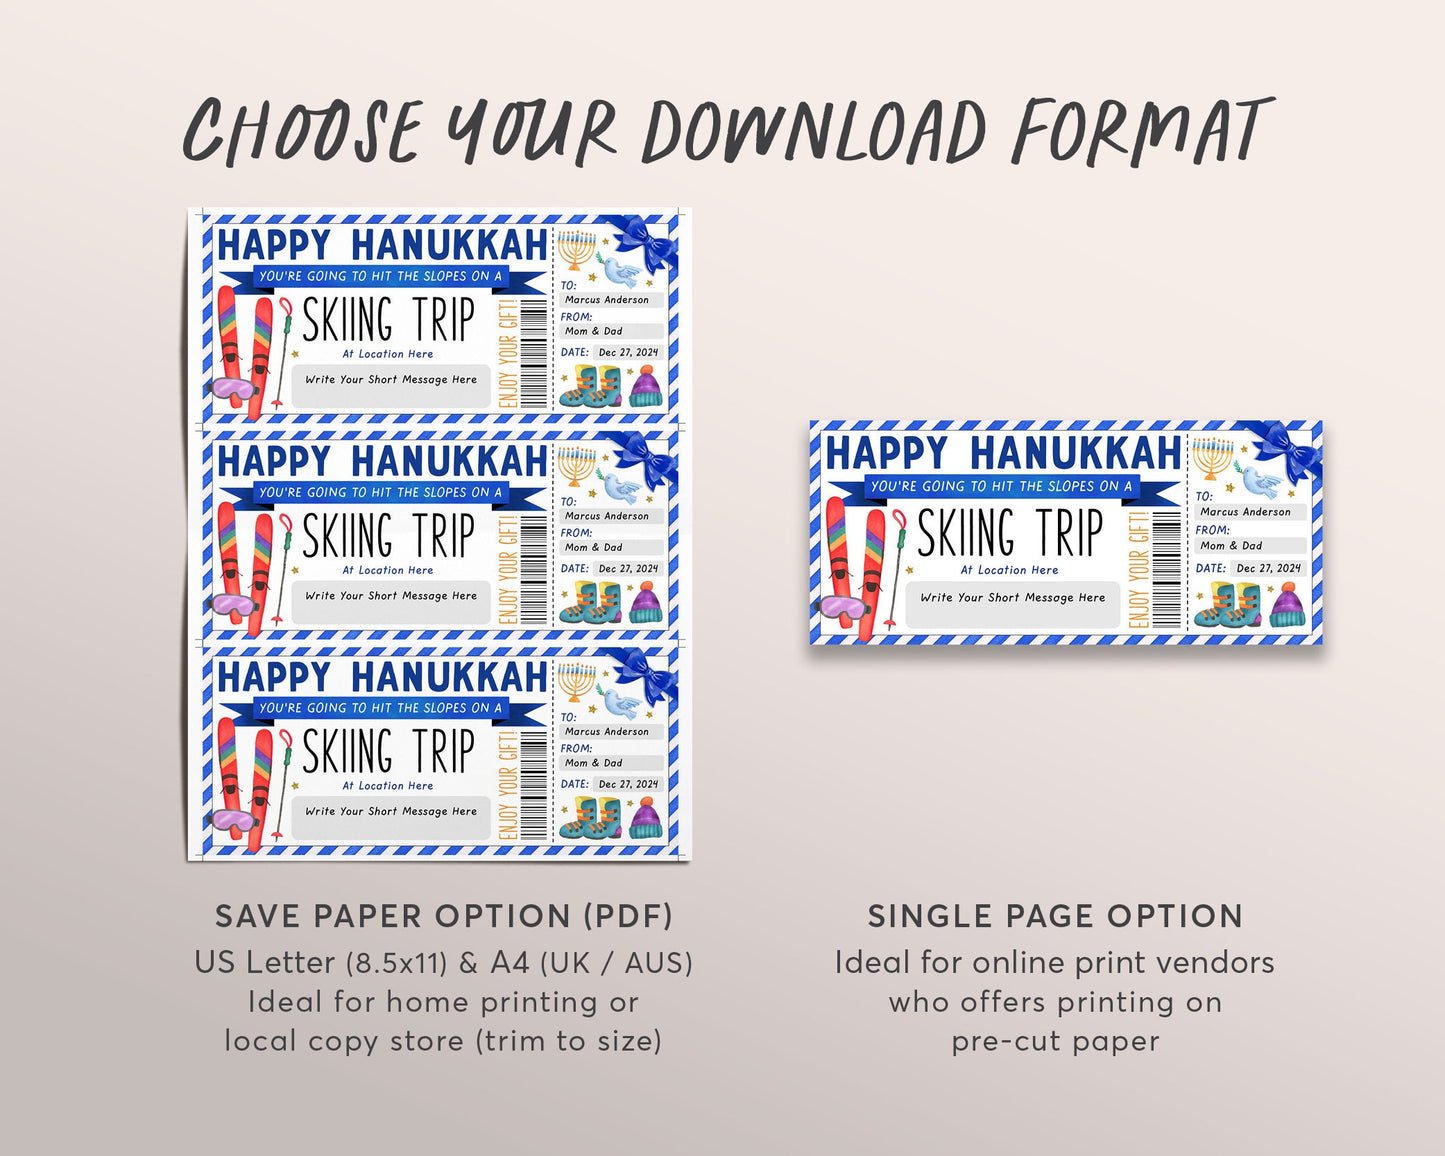 Happy Hanukkah Skiing Trip Gift Certificate Editable Template, Surprise Chanukah Holiday Ski Pass Vacation Gift Voucher, Skiing Lessons